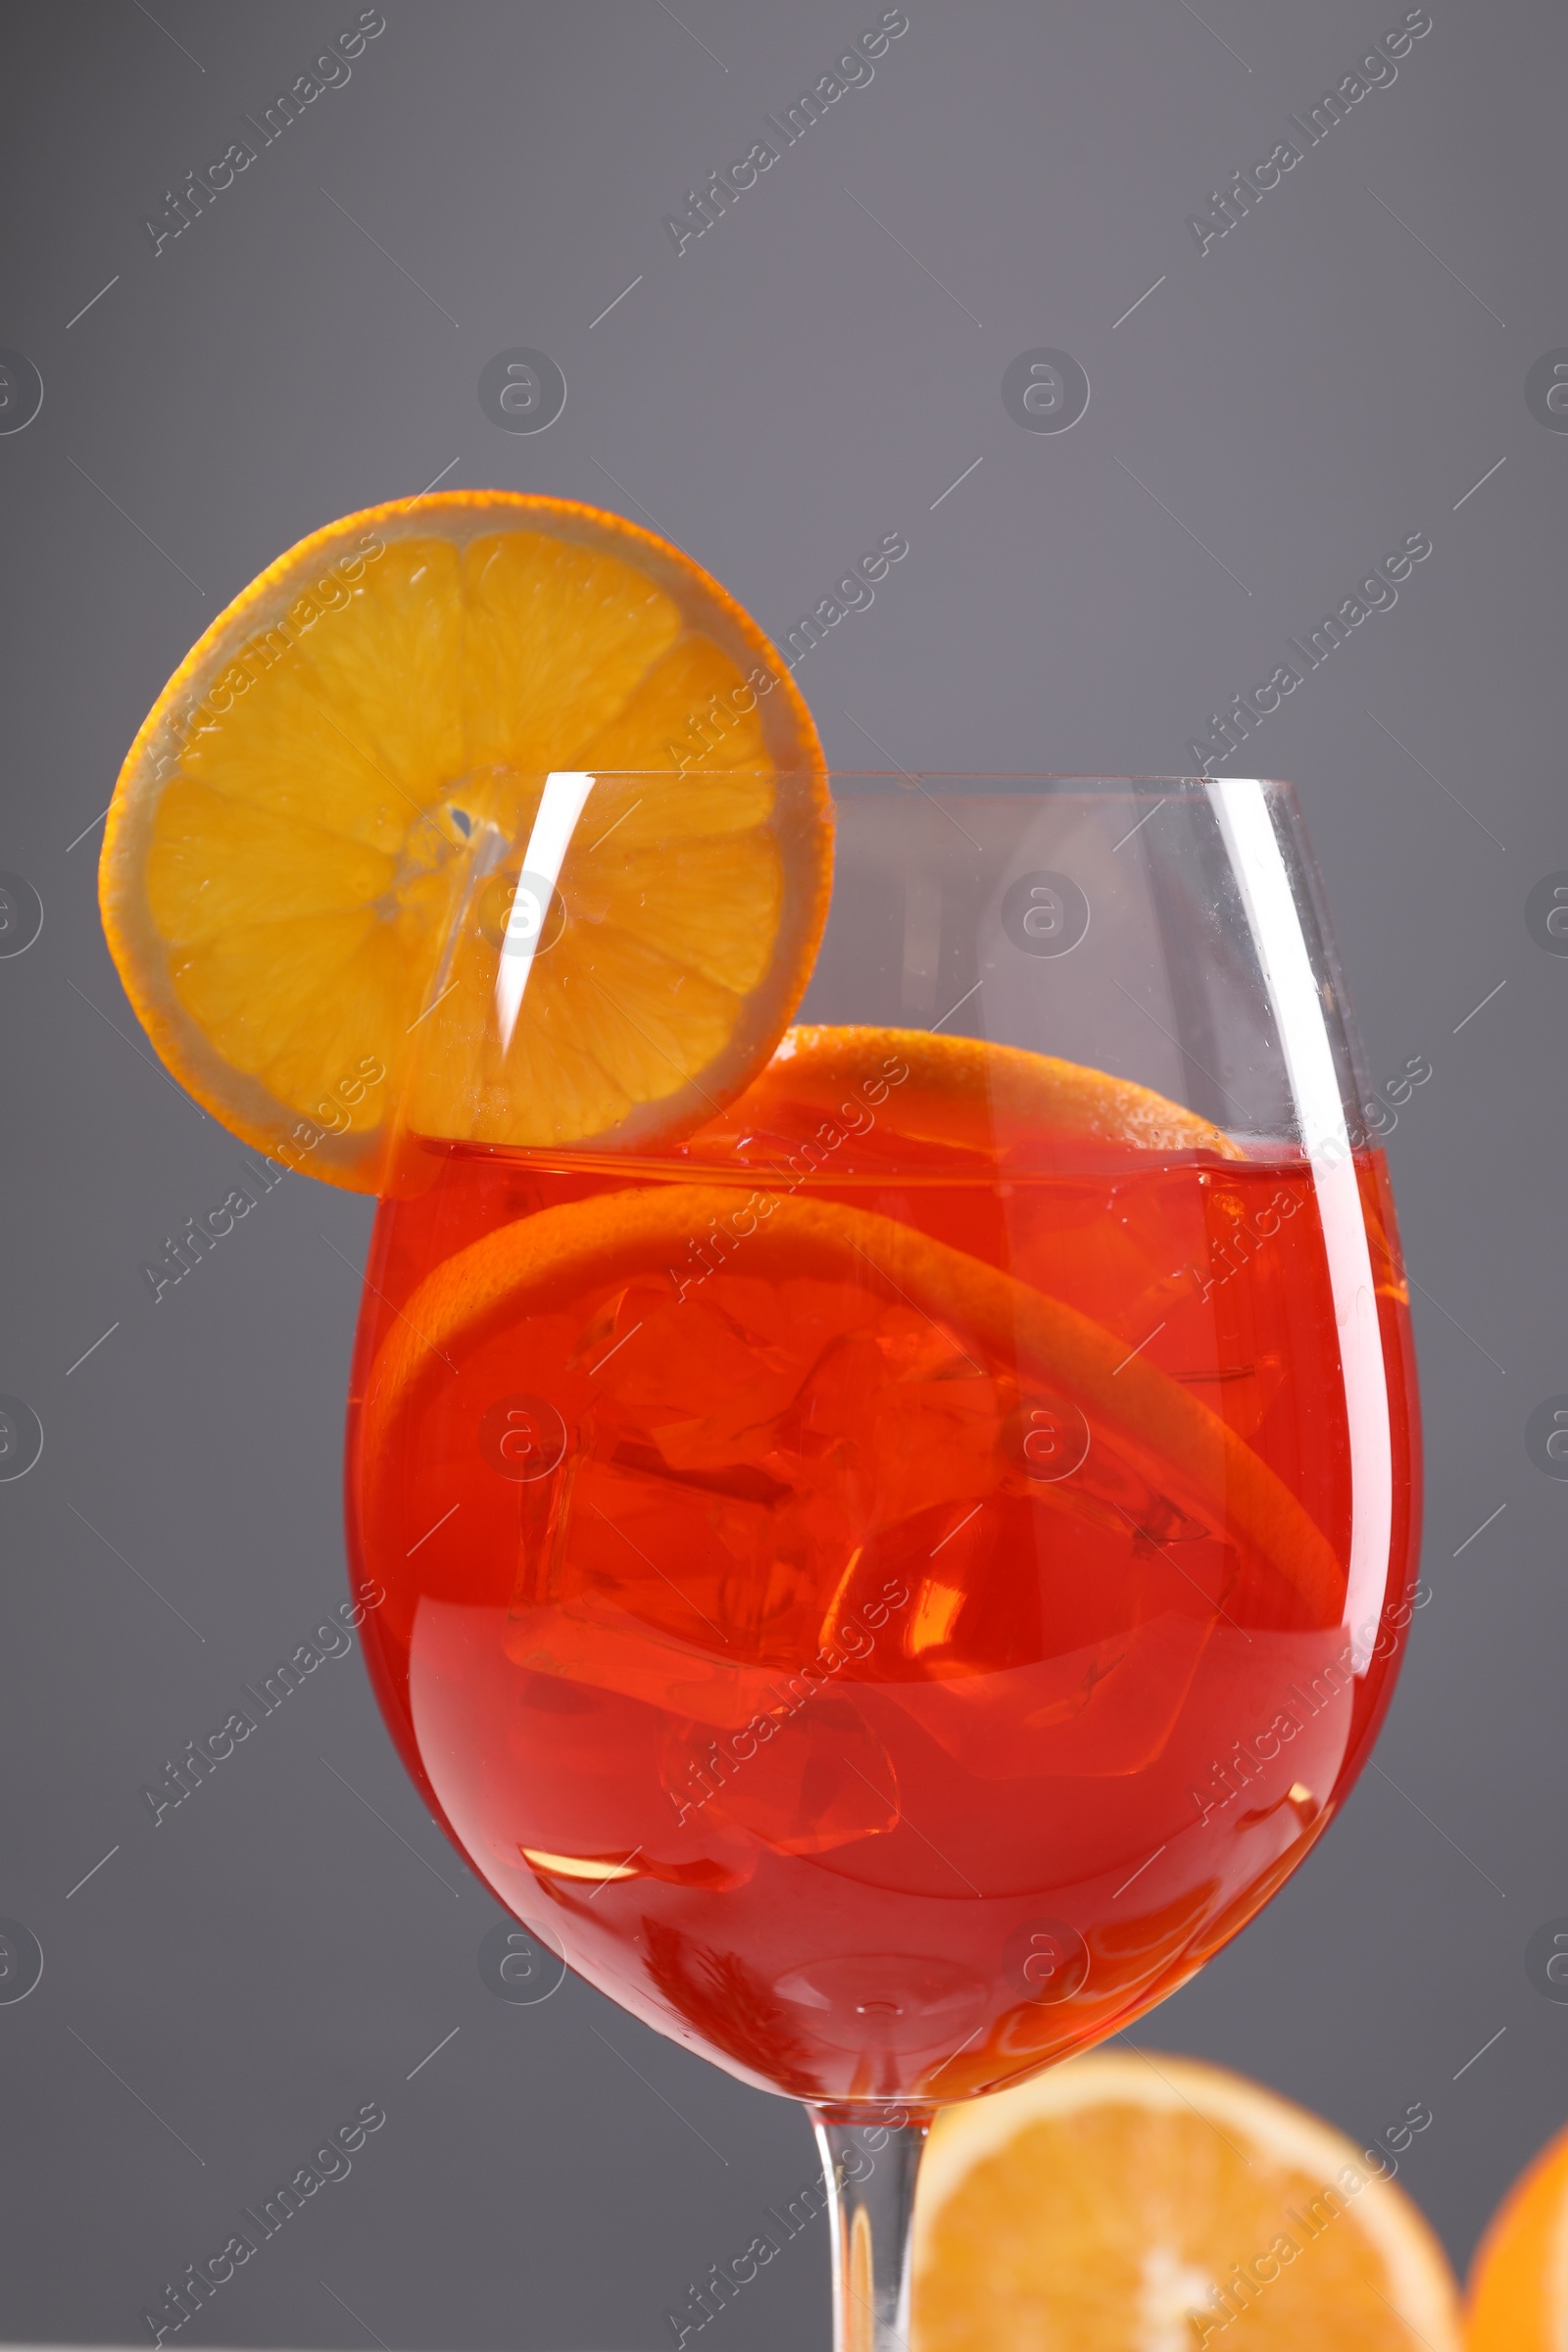 Photo of Glass of tasty Aperol spritz cocktail against gray background